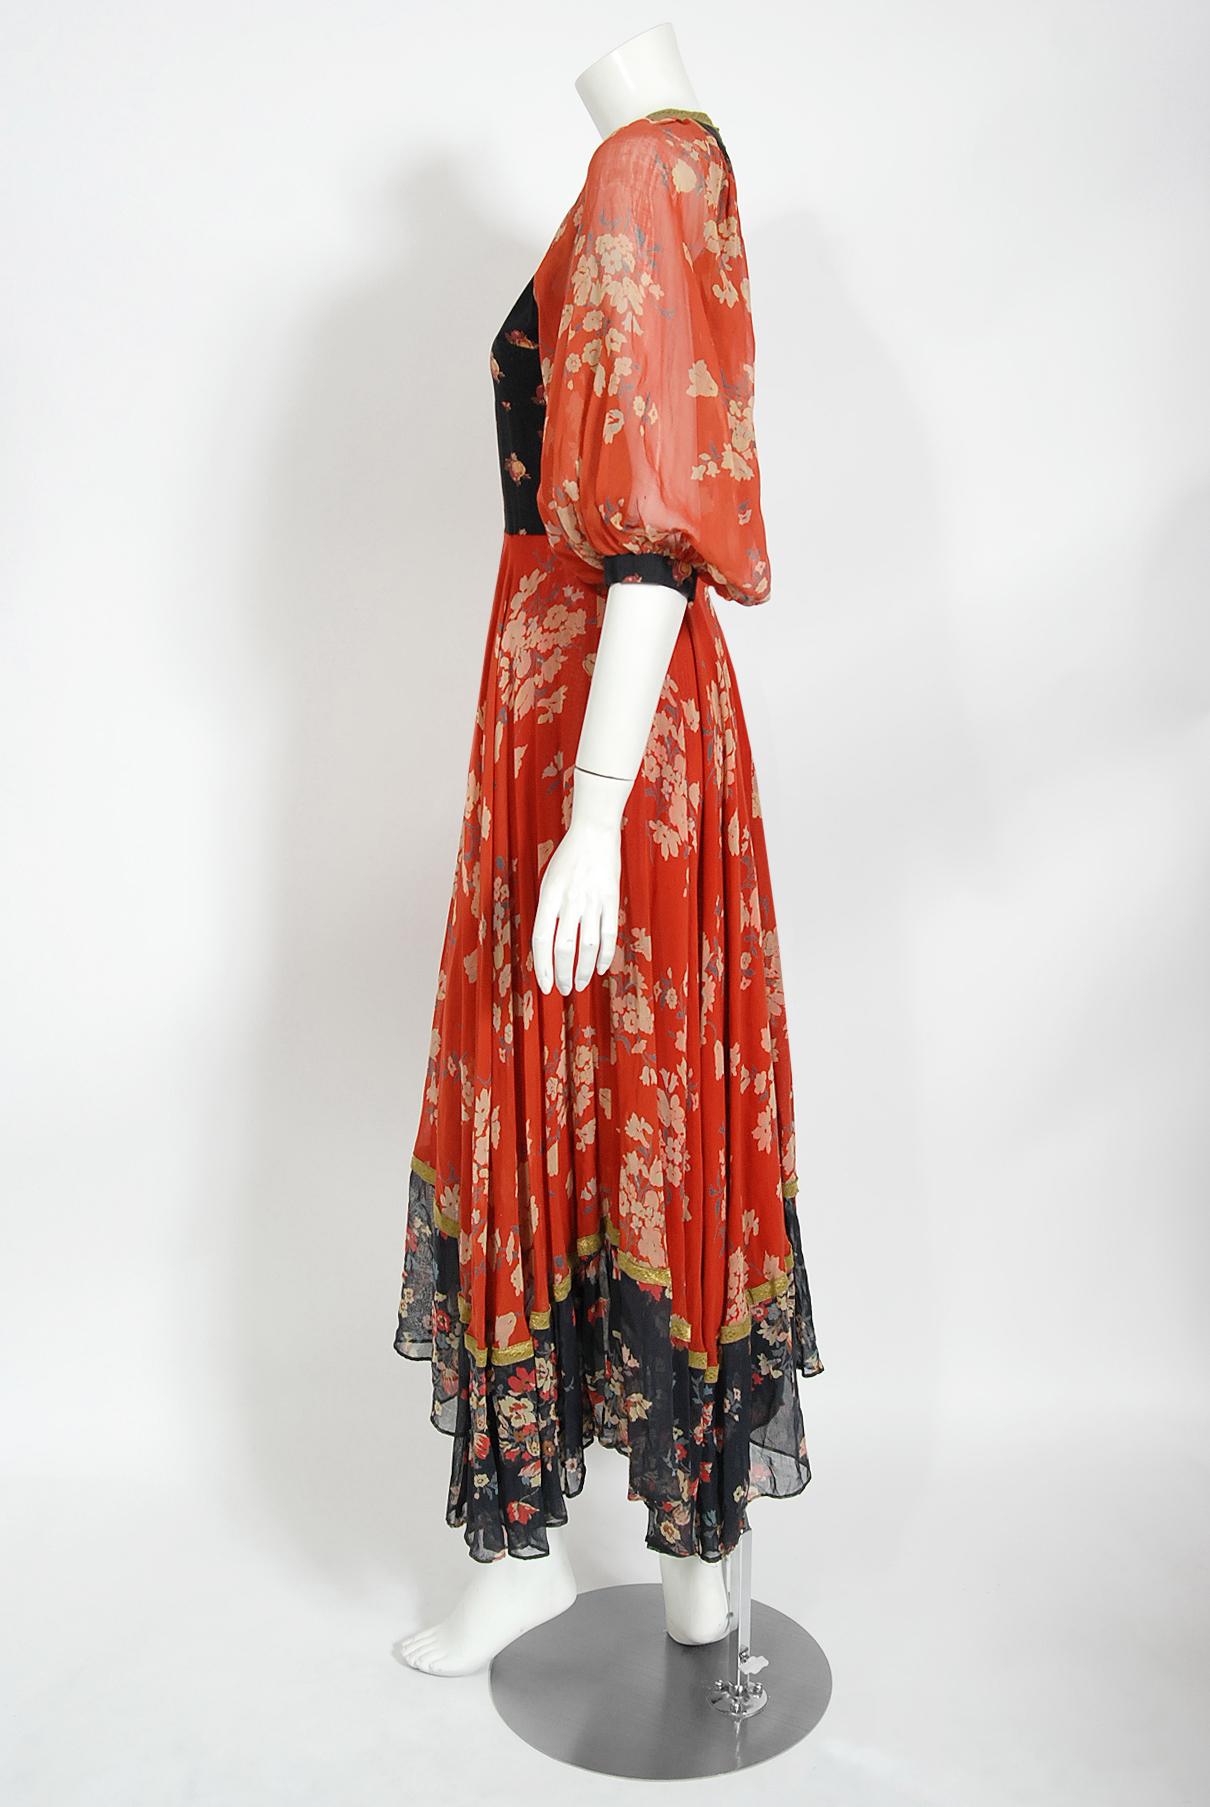 Vintage 1971 Thea Porter Documented Black & Red Floral Print Cotton Gypsy Dress  5